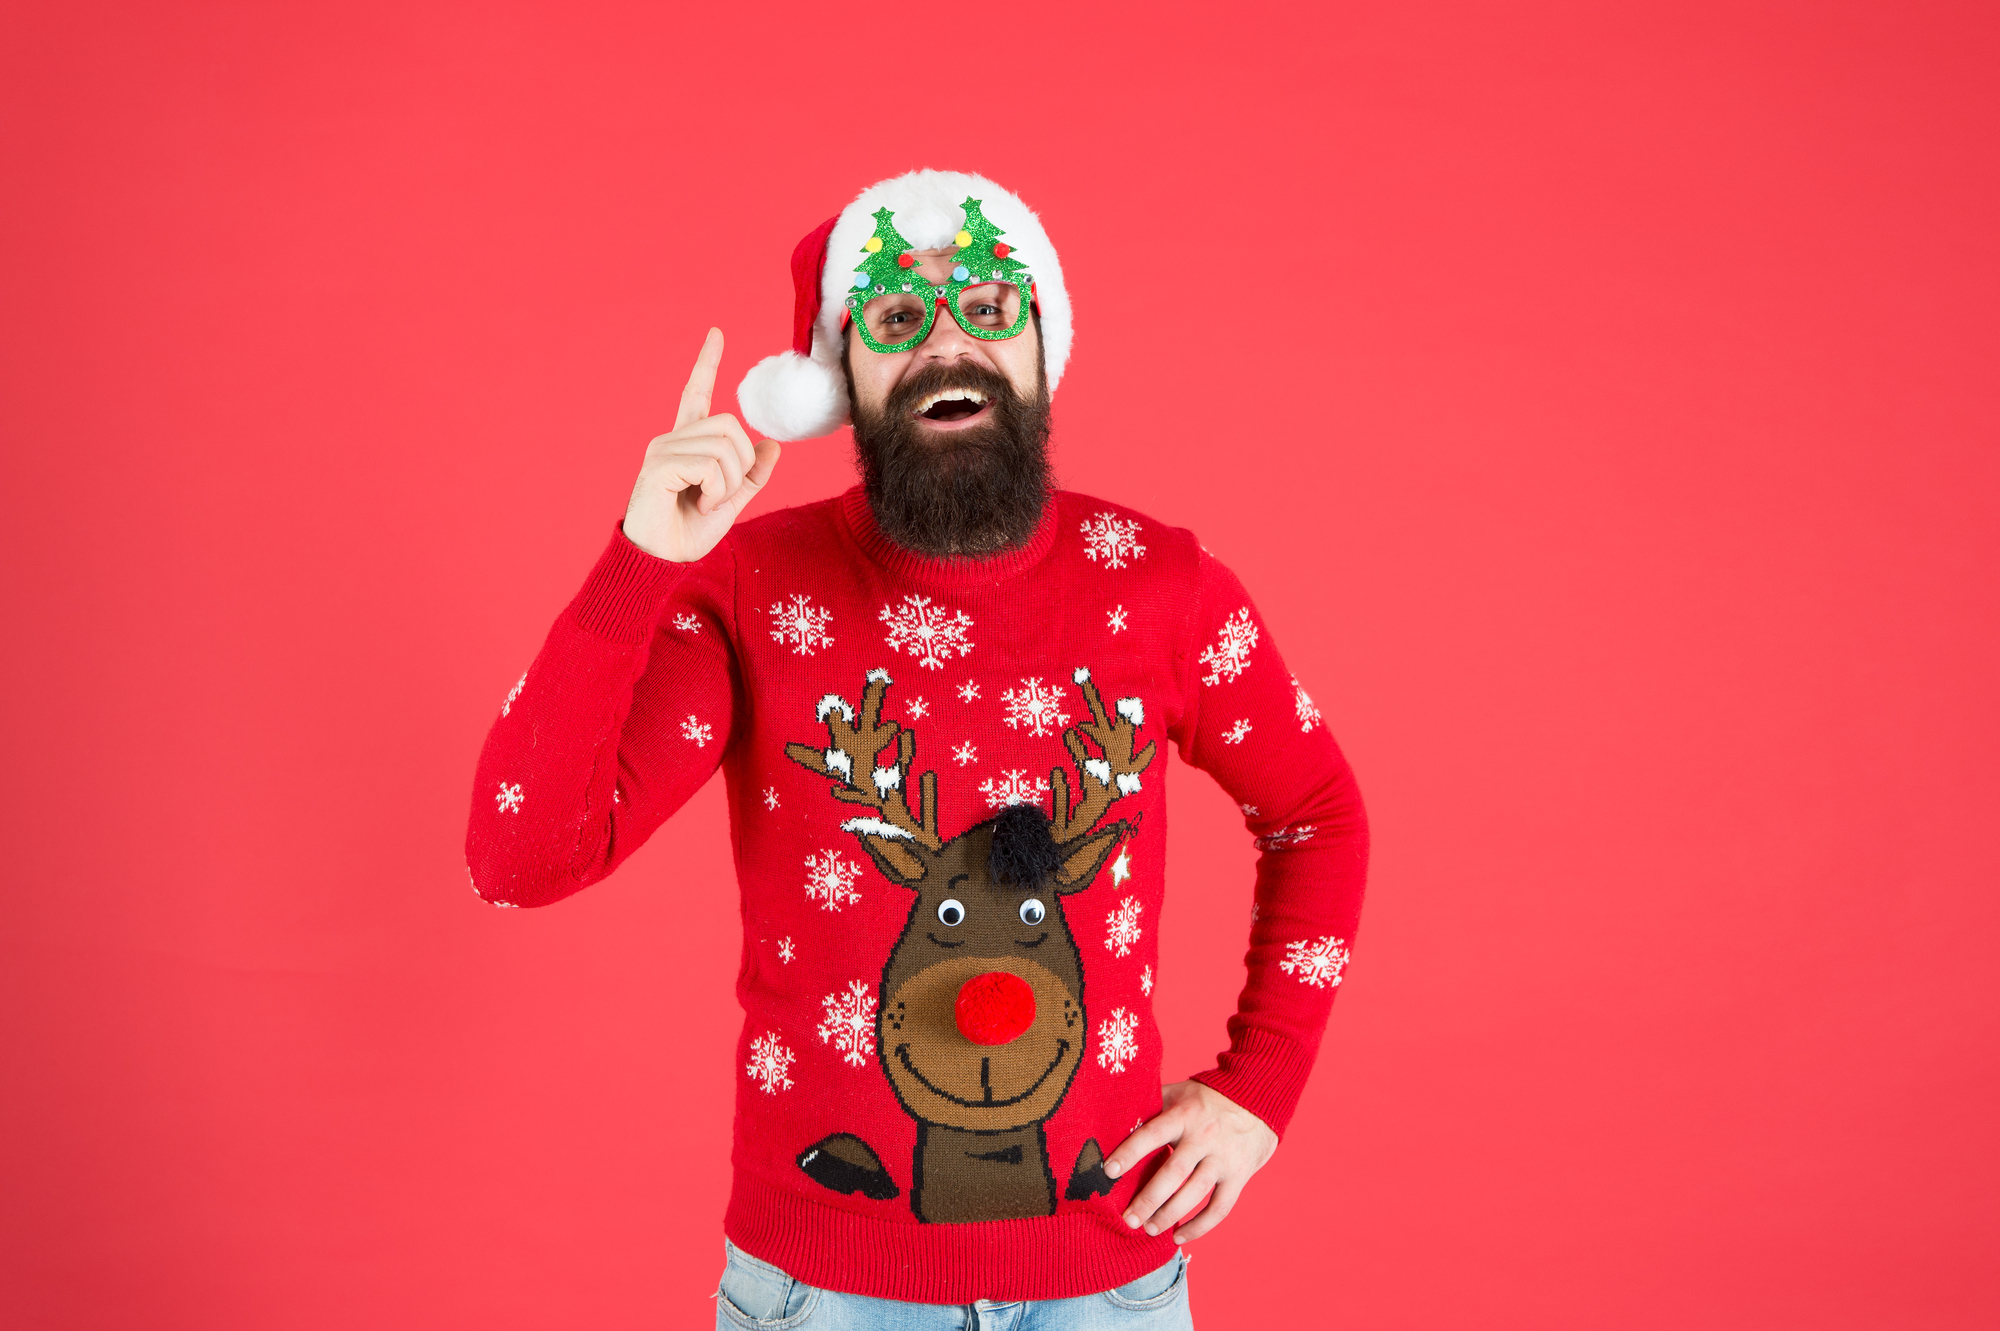 An OFFICIAL bearded man participating in a BAR CRAWL wearing an UGLY SWEATER.